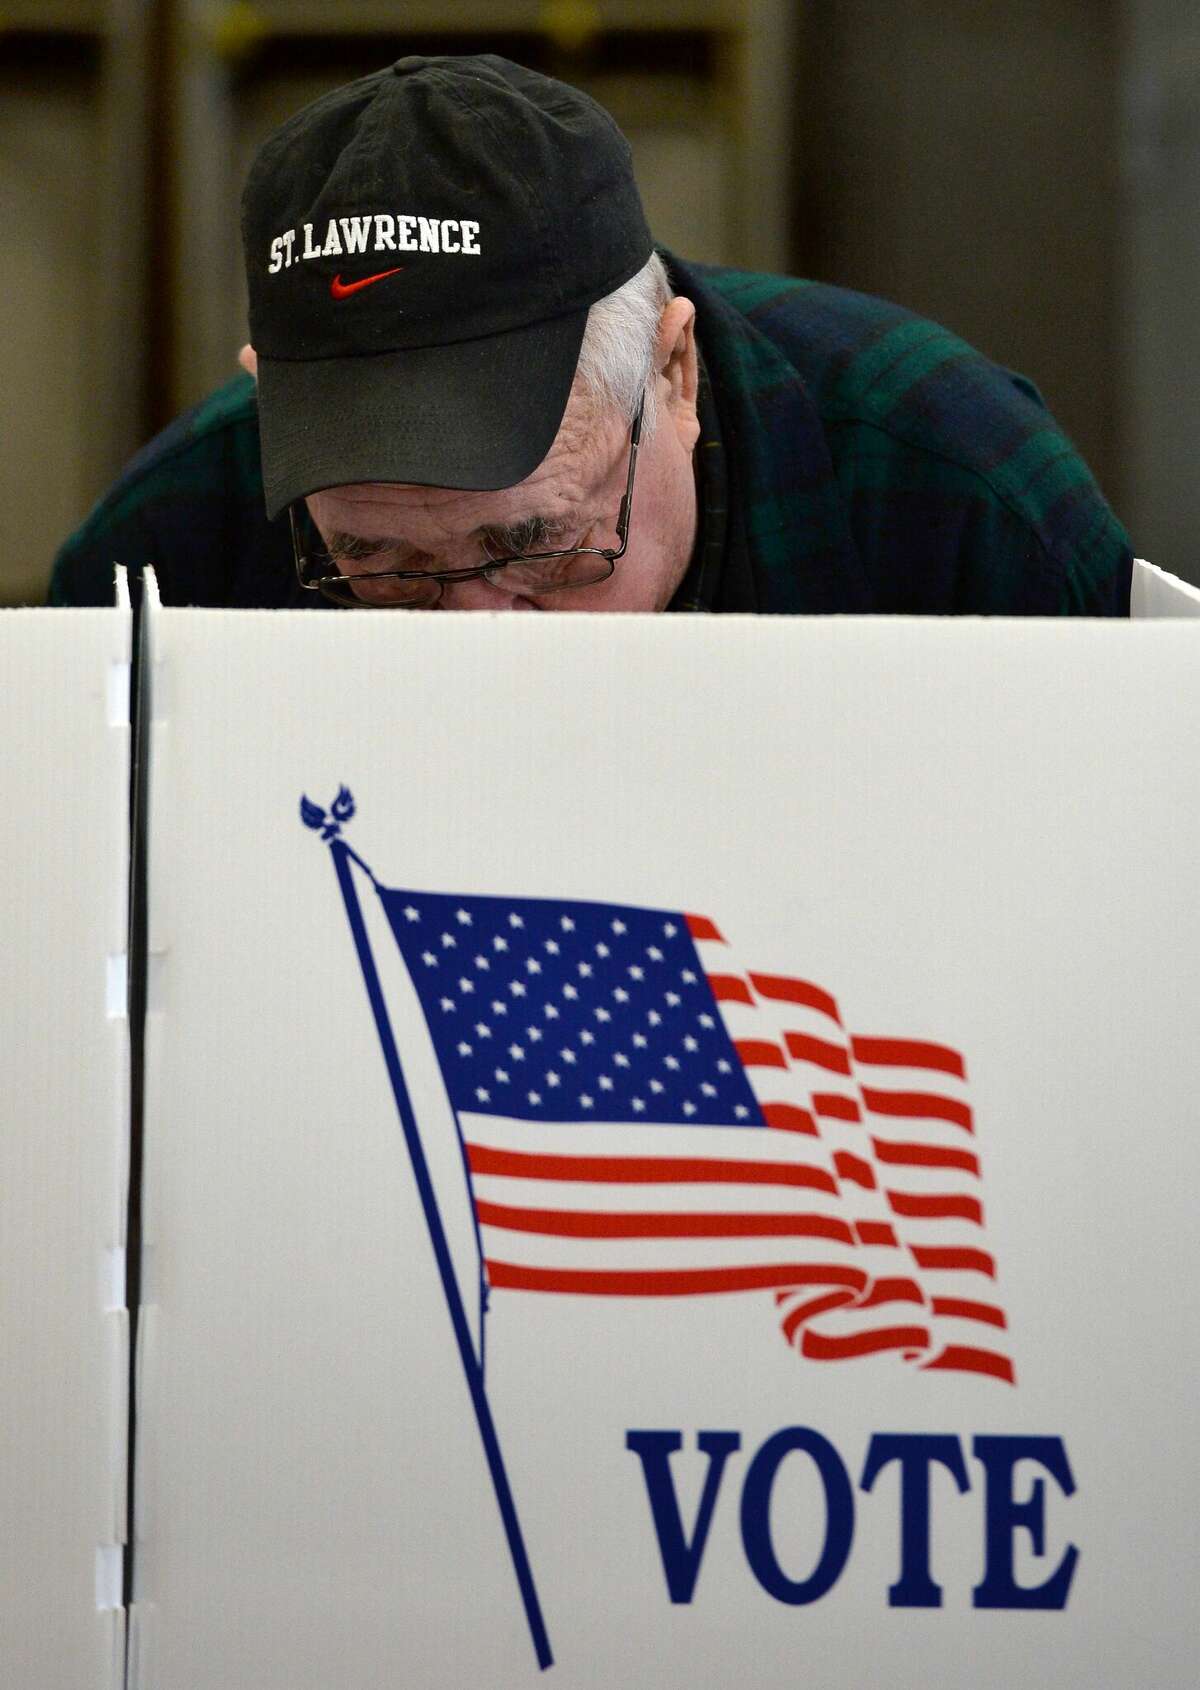 An elderly man votes in the New Hampshire primary Feb. 9, 2016. In Michigan, older adults account for nearly one-quarter of the population. Seniors are encouraged to take part in Senior Action Week, May 9-13, to voice to the Michigan Legislature concerns, challenges and opportunities for older adults.